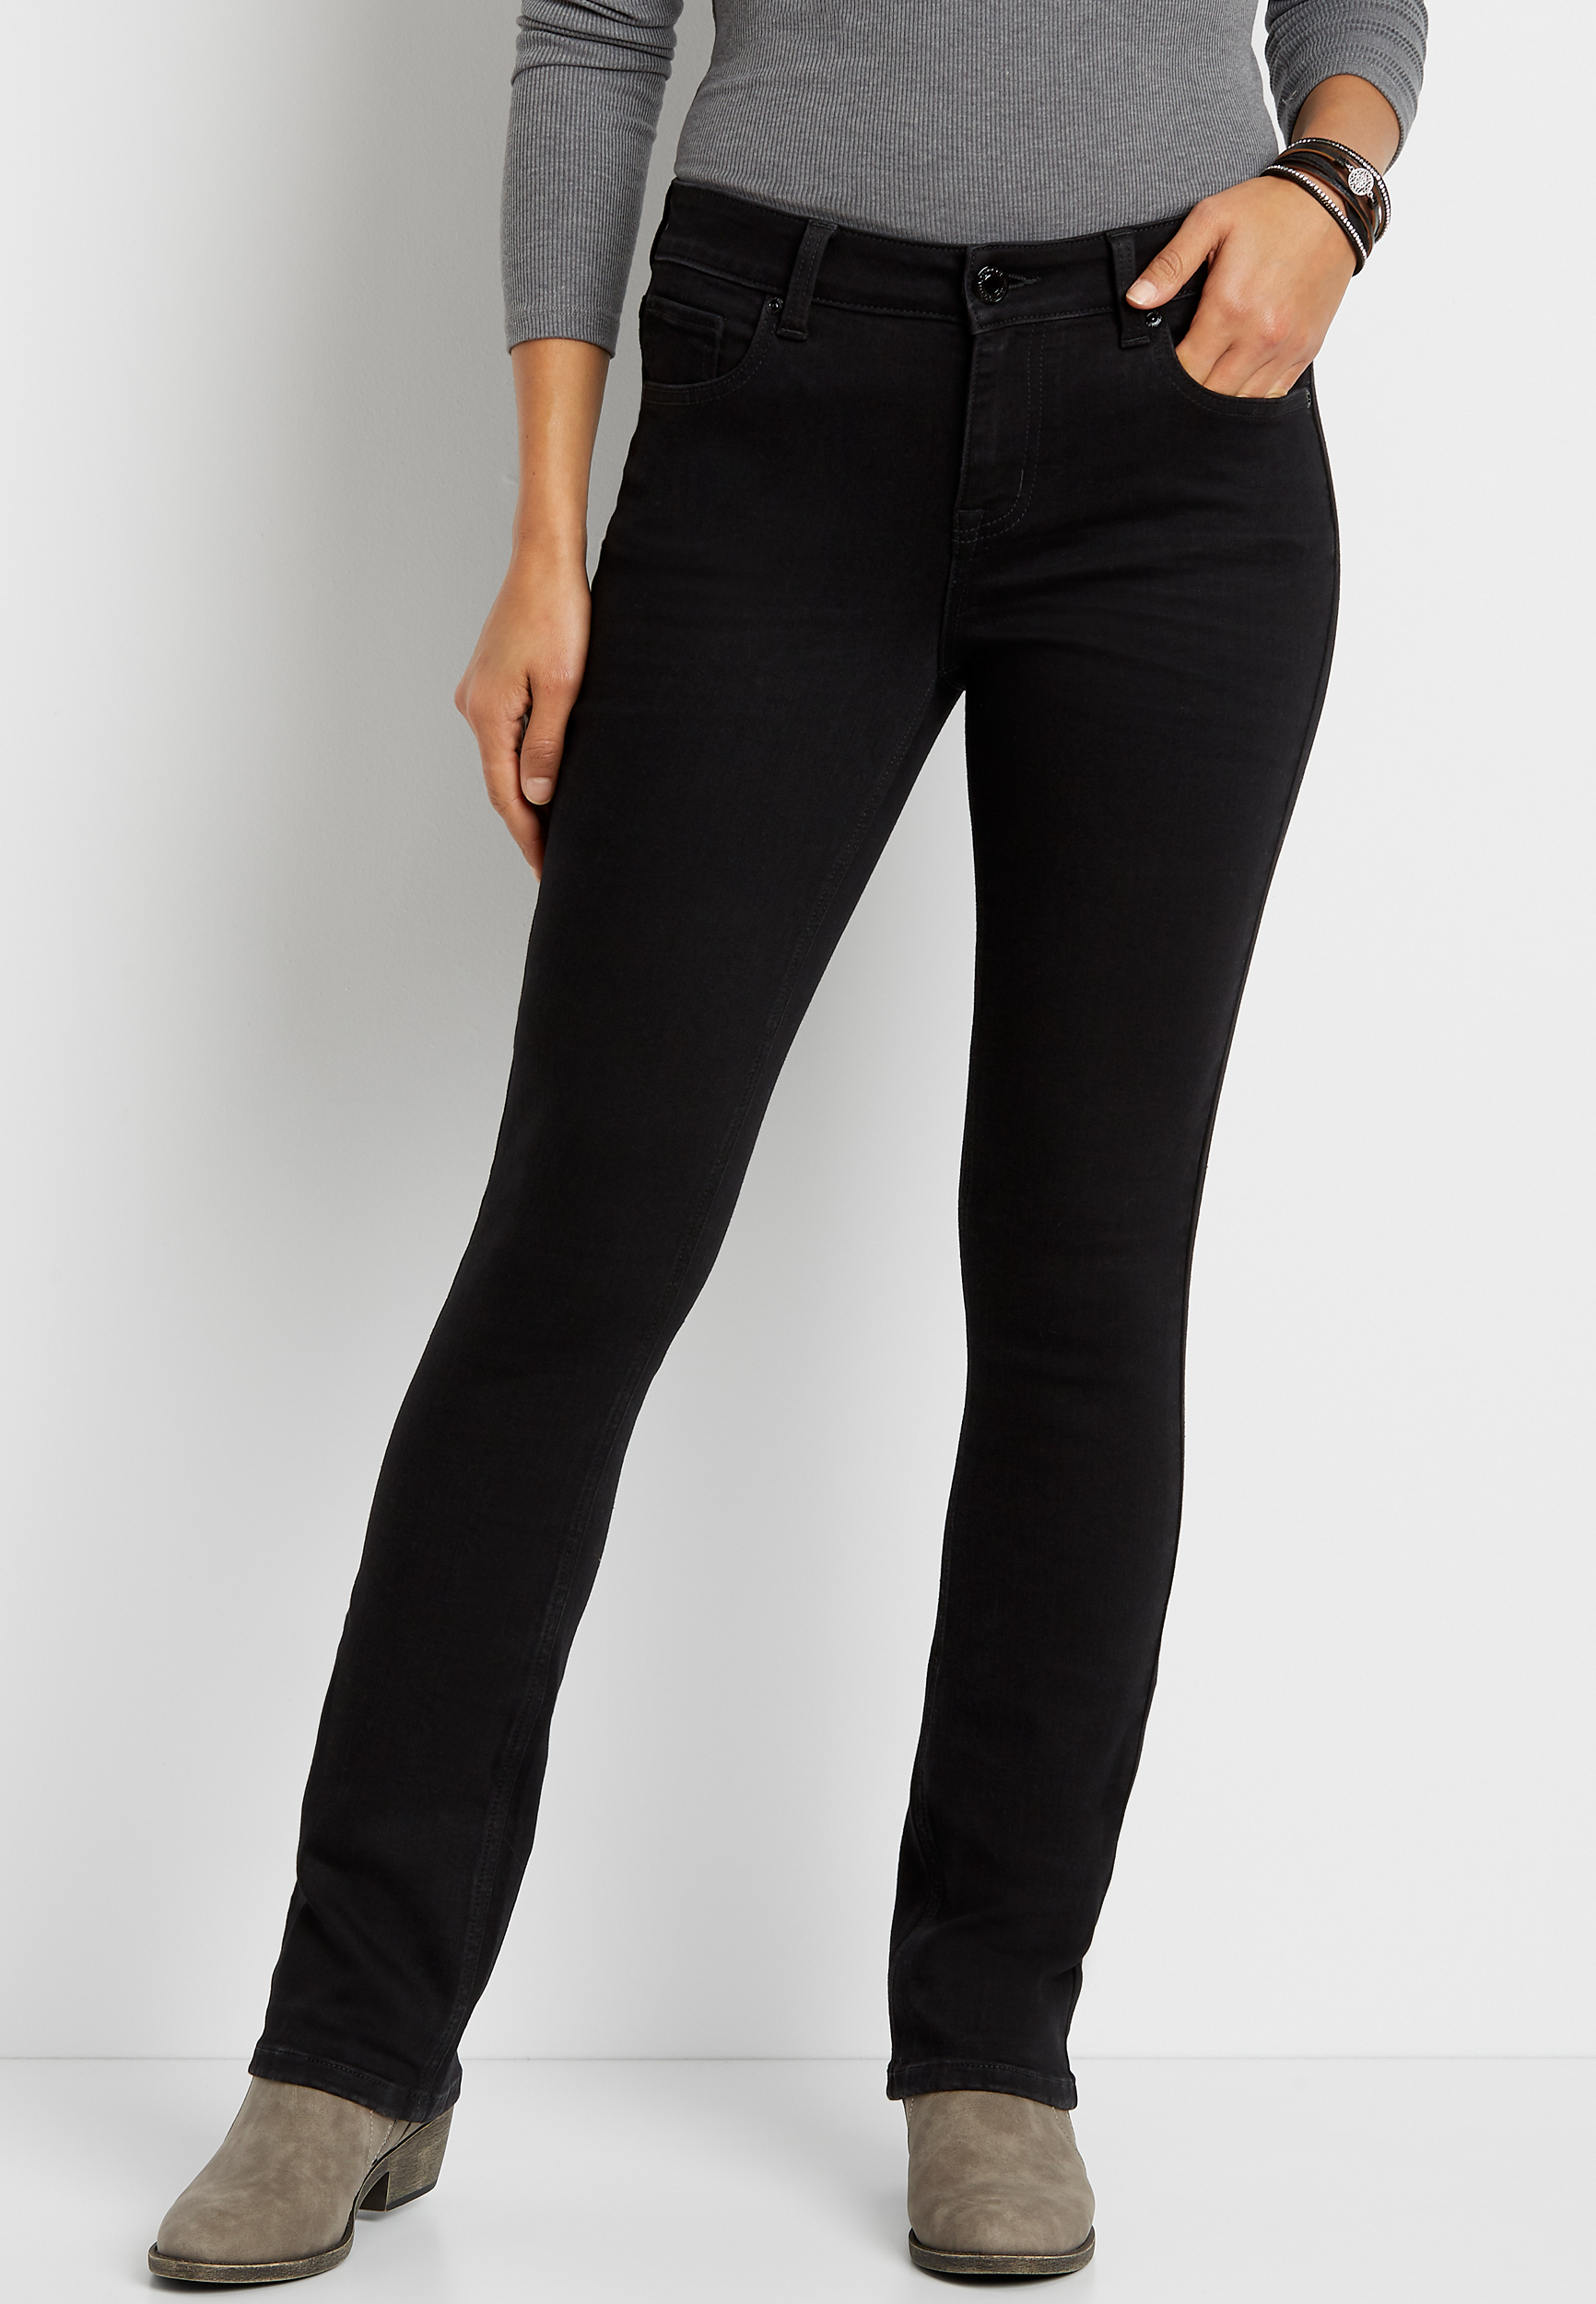 m jeans by maurices™ Classic Black Boot Mid Rise Jean | maurices